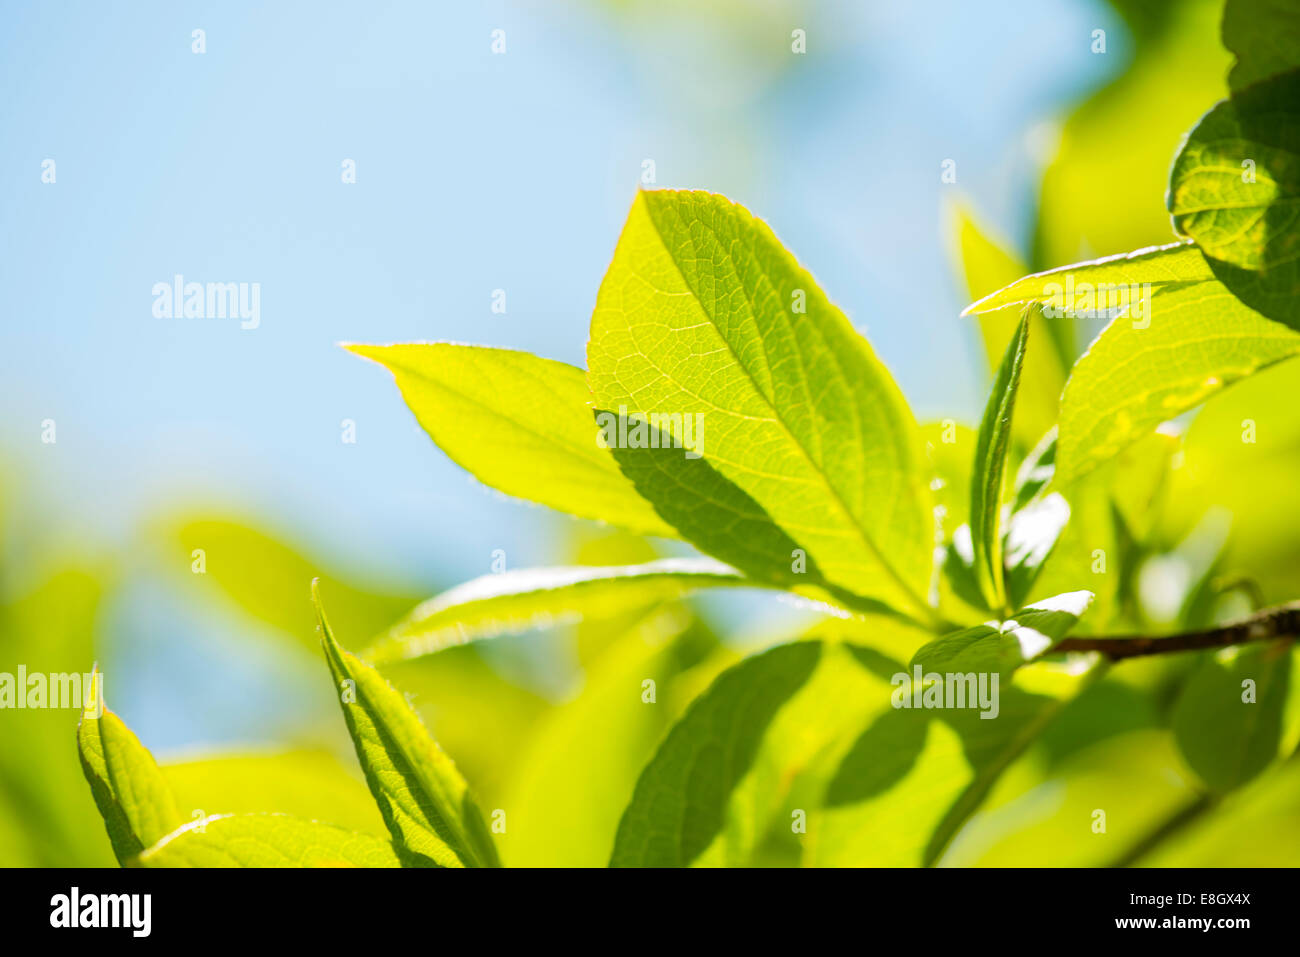 Green Leaves Stock Photo